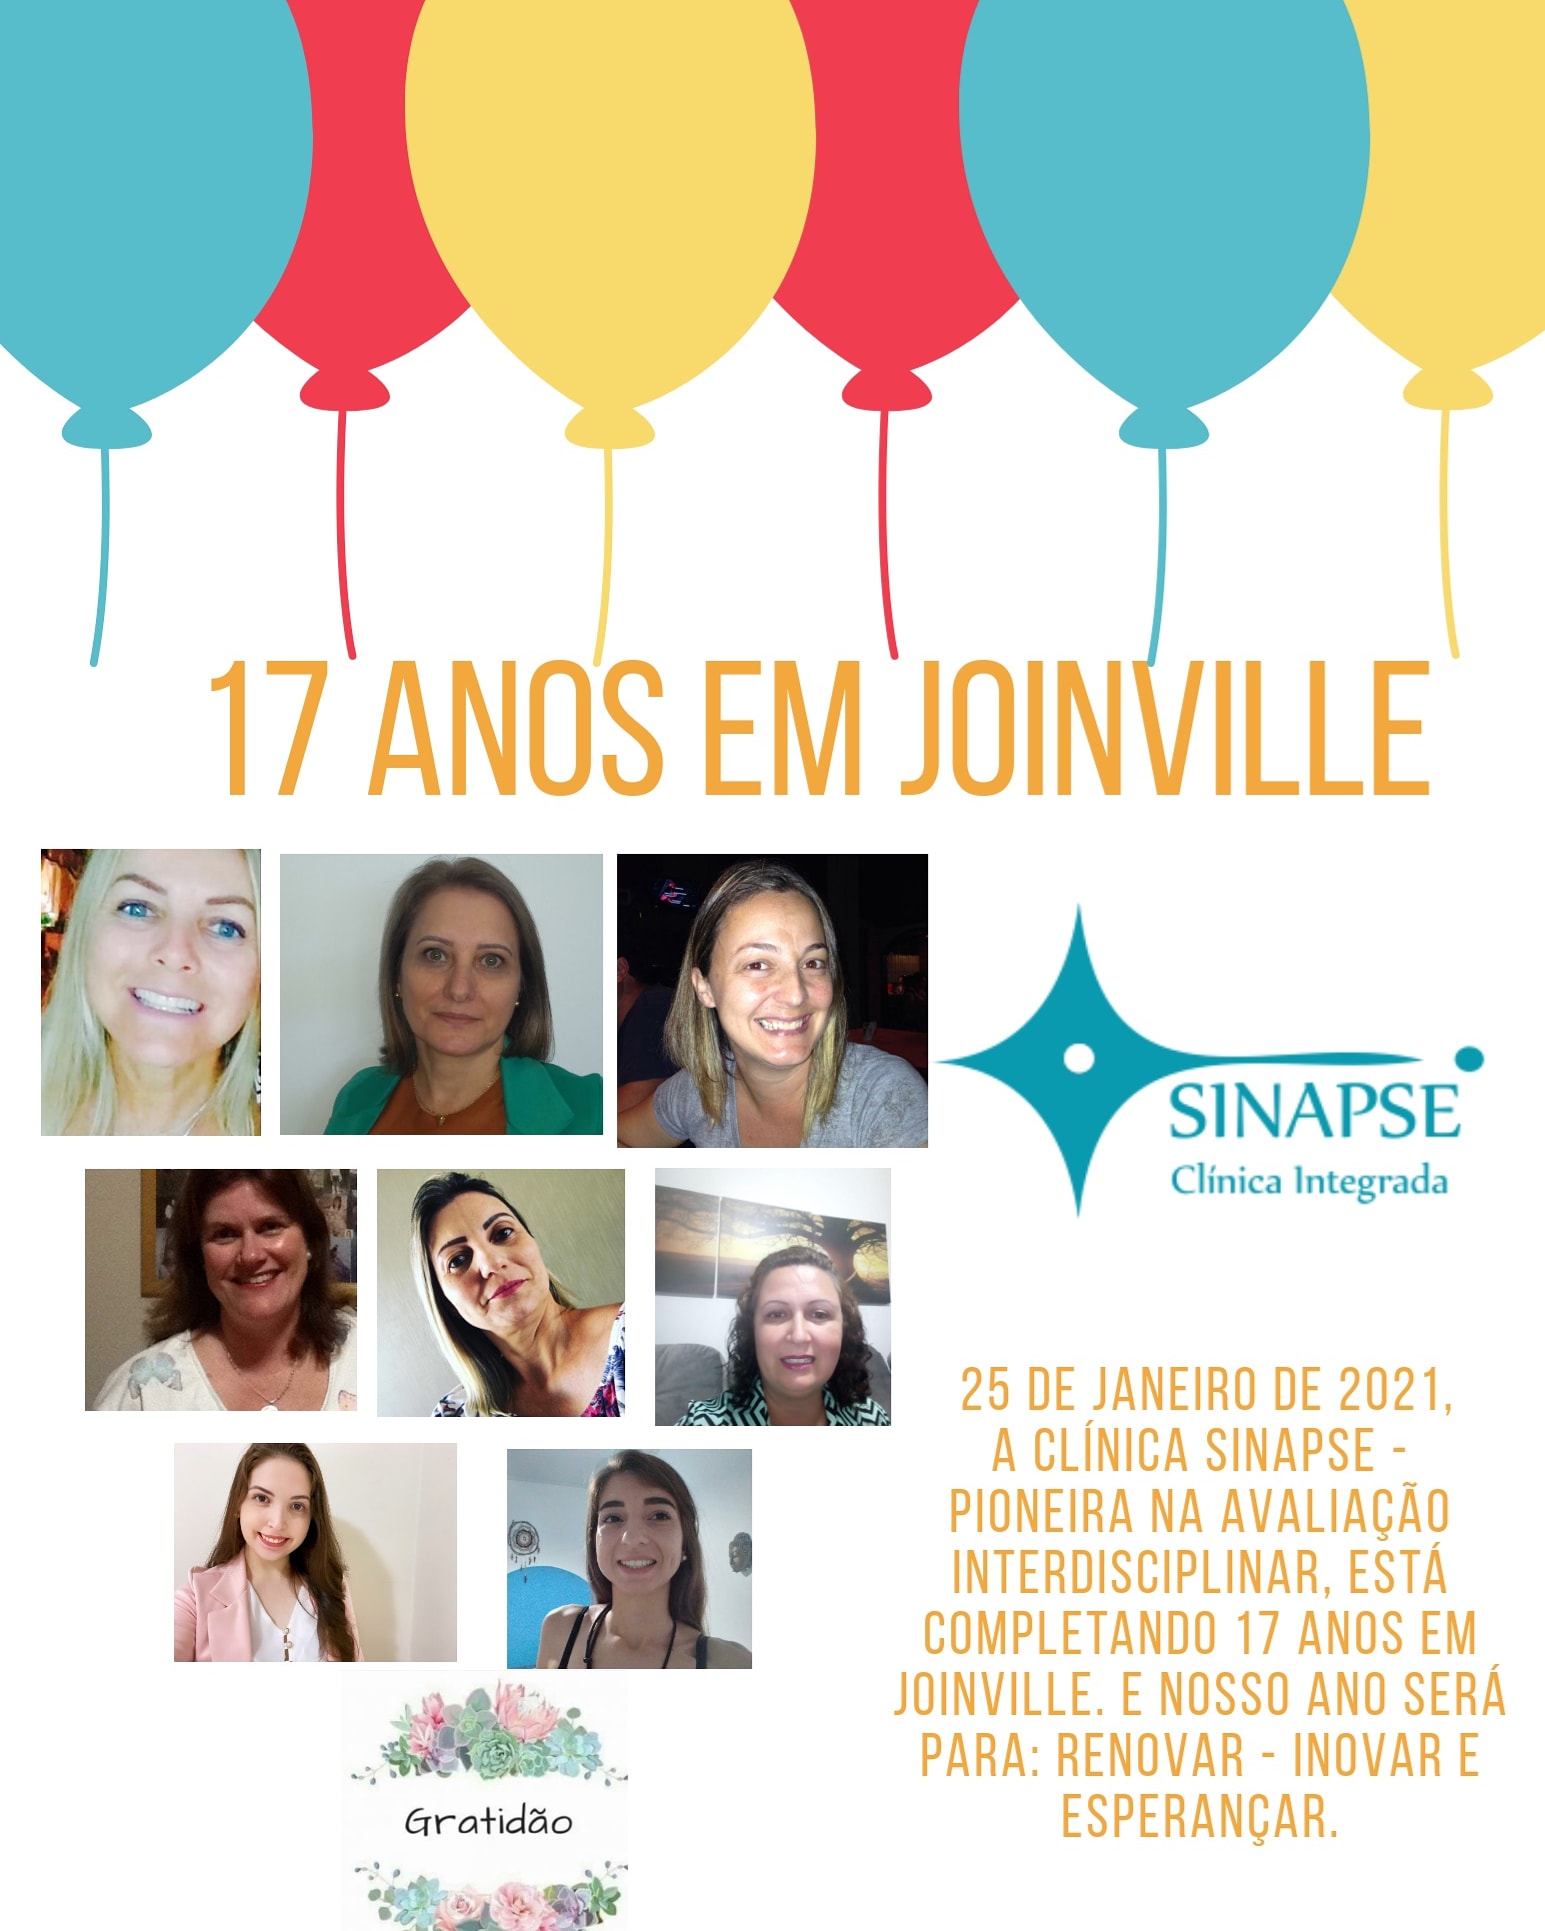 17 anos em Joinville!